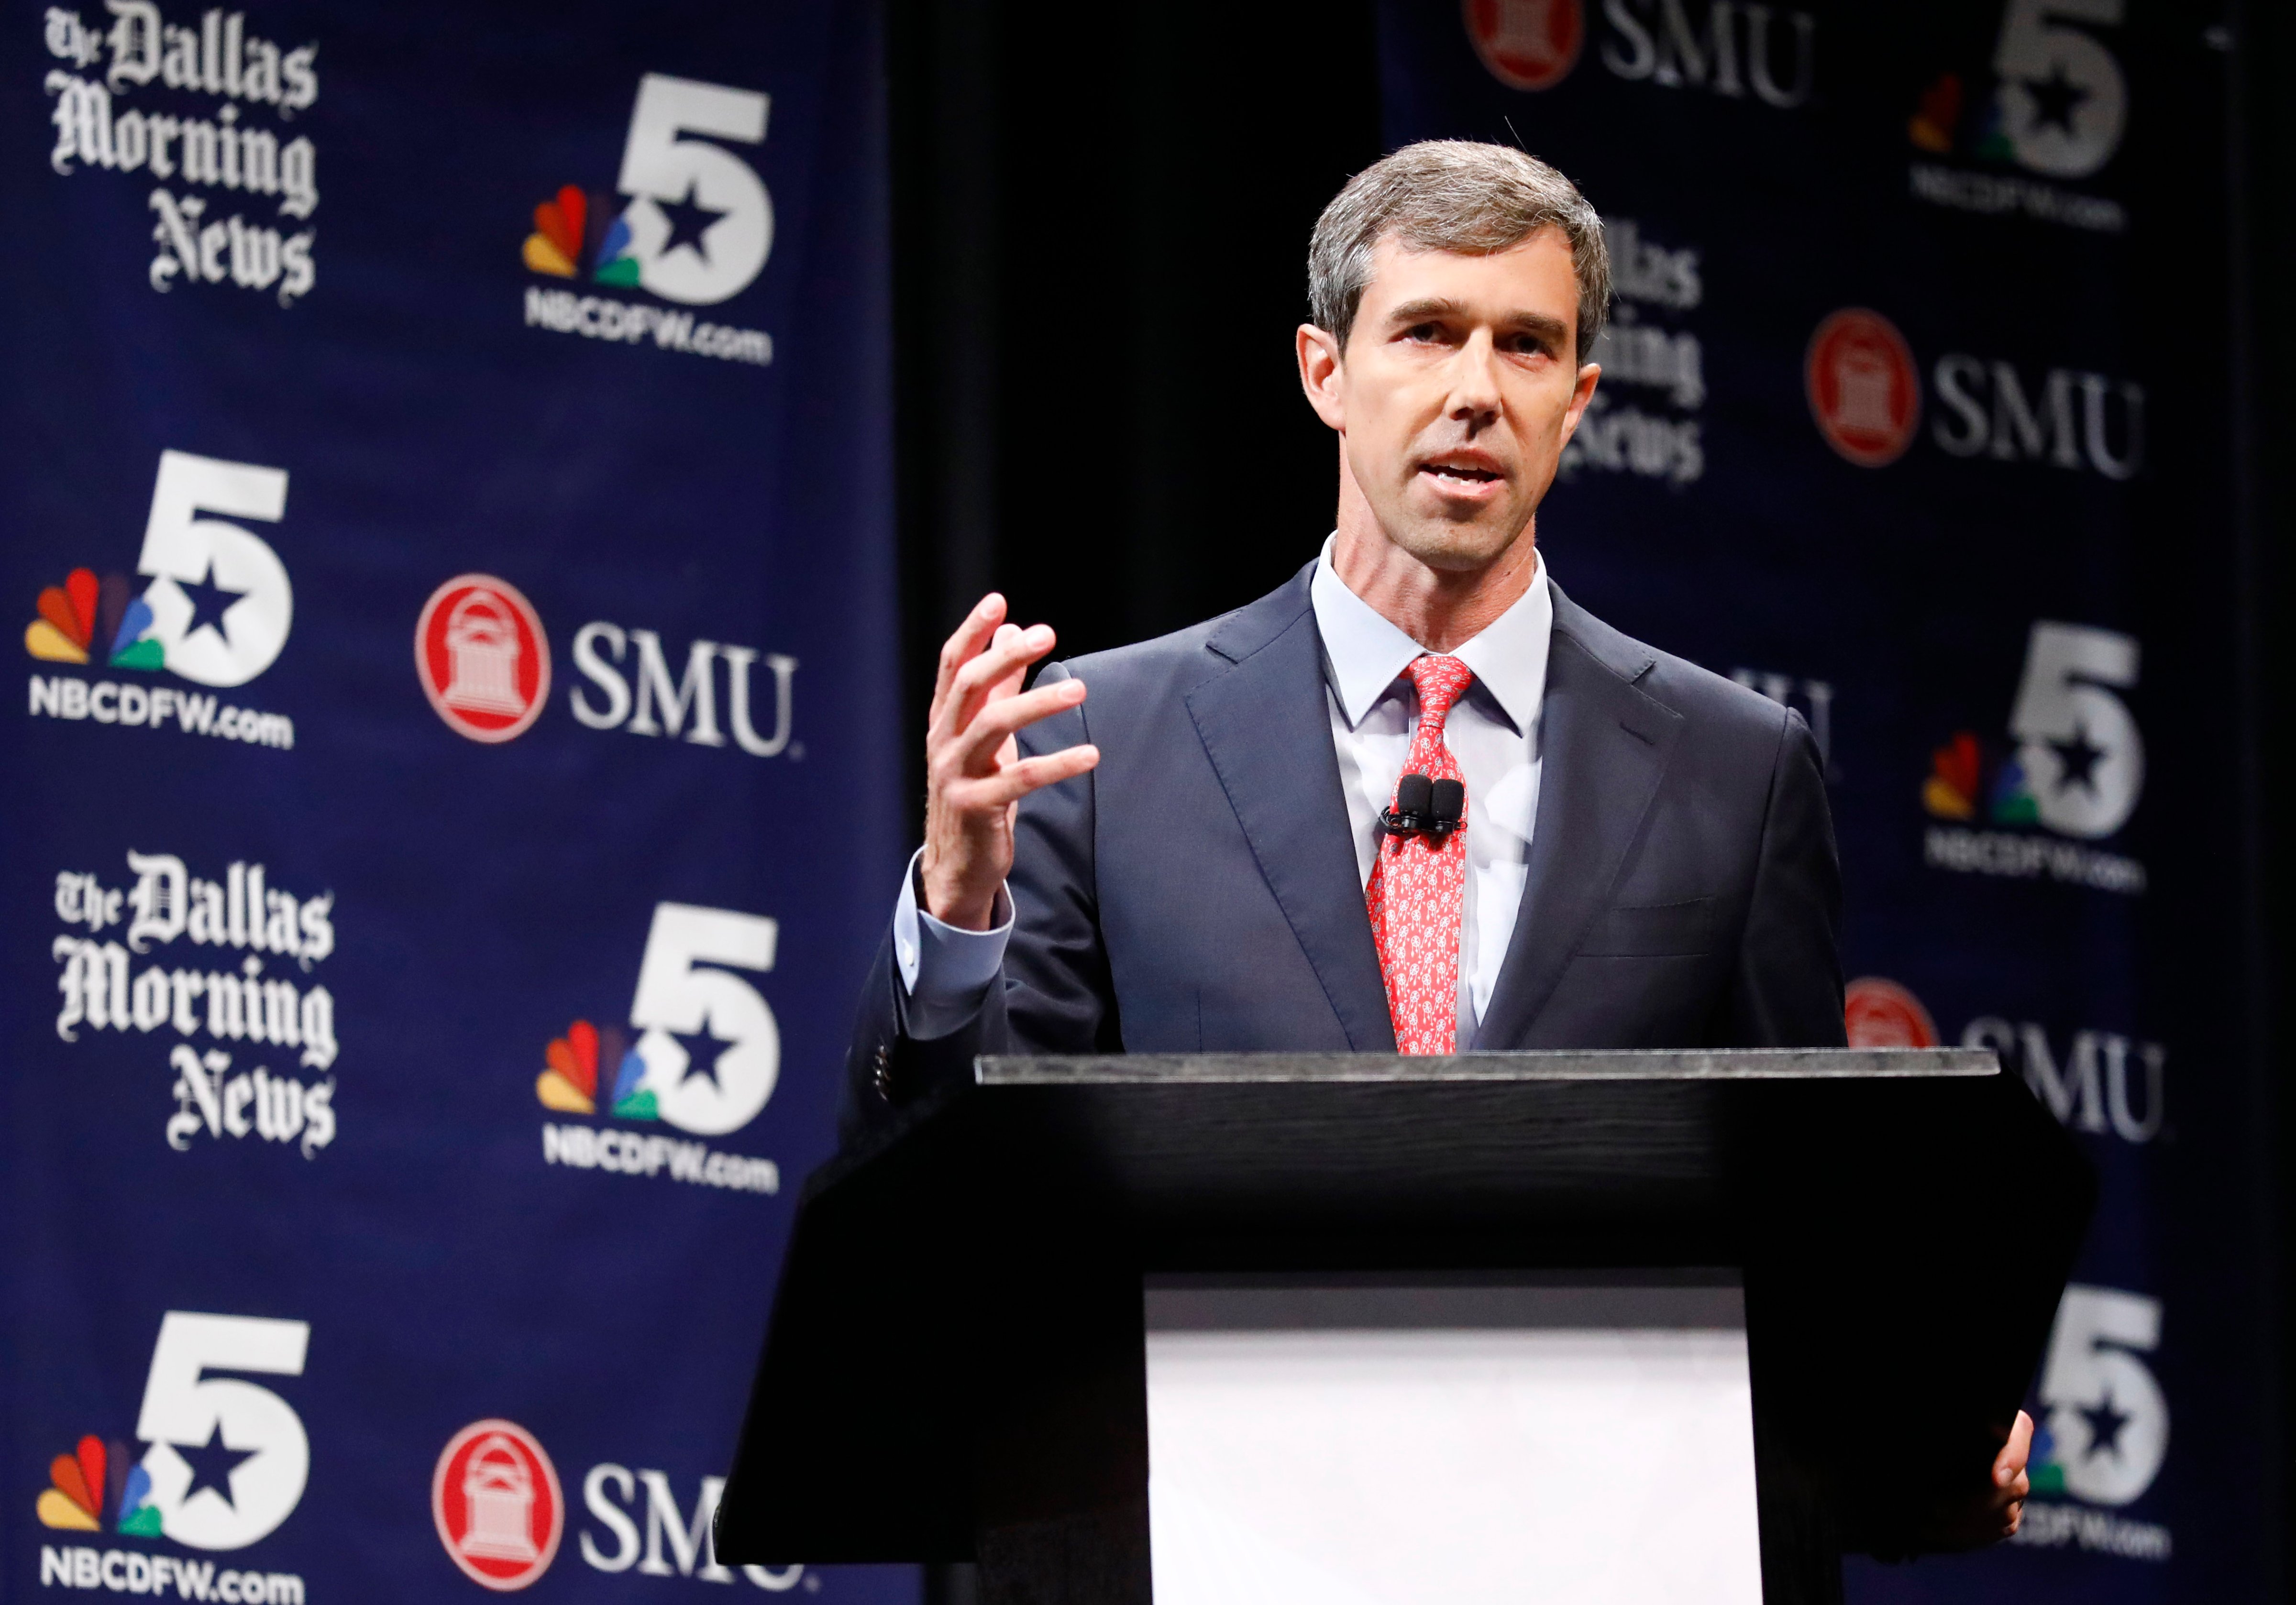 Rep. Beto O'Rourke (D-TX) makes a point in a debate with Sen. Ted Cruz (R-TX) at McFarlin Auditorium at SMU on September 21, 2018 in Dallas, Texas. (Getty Images)